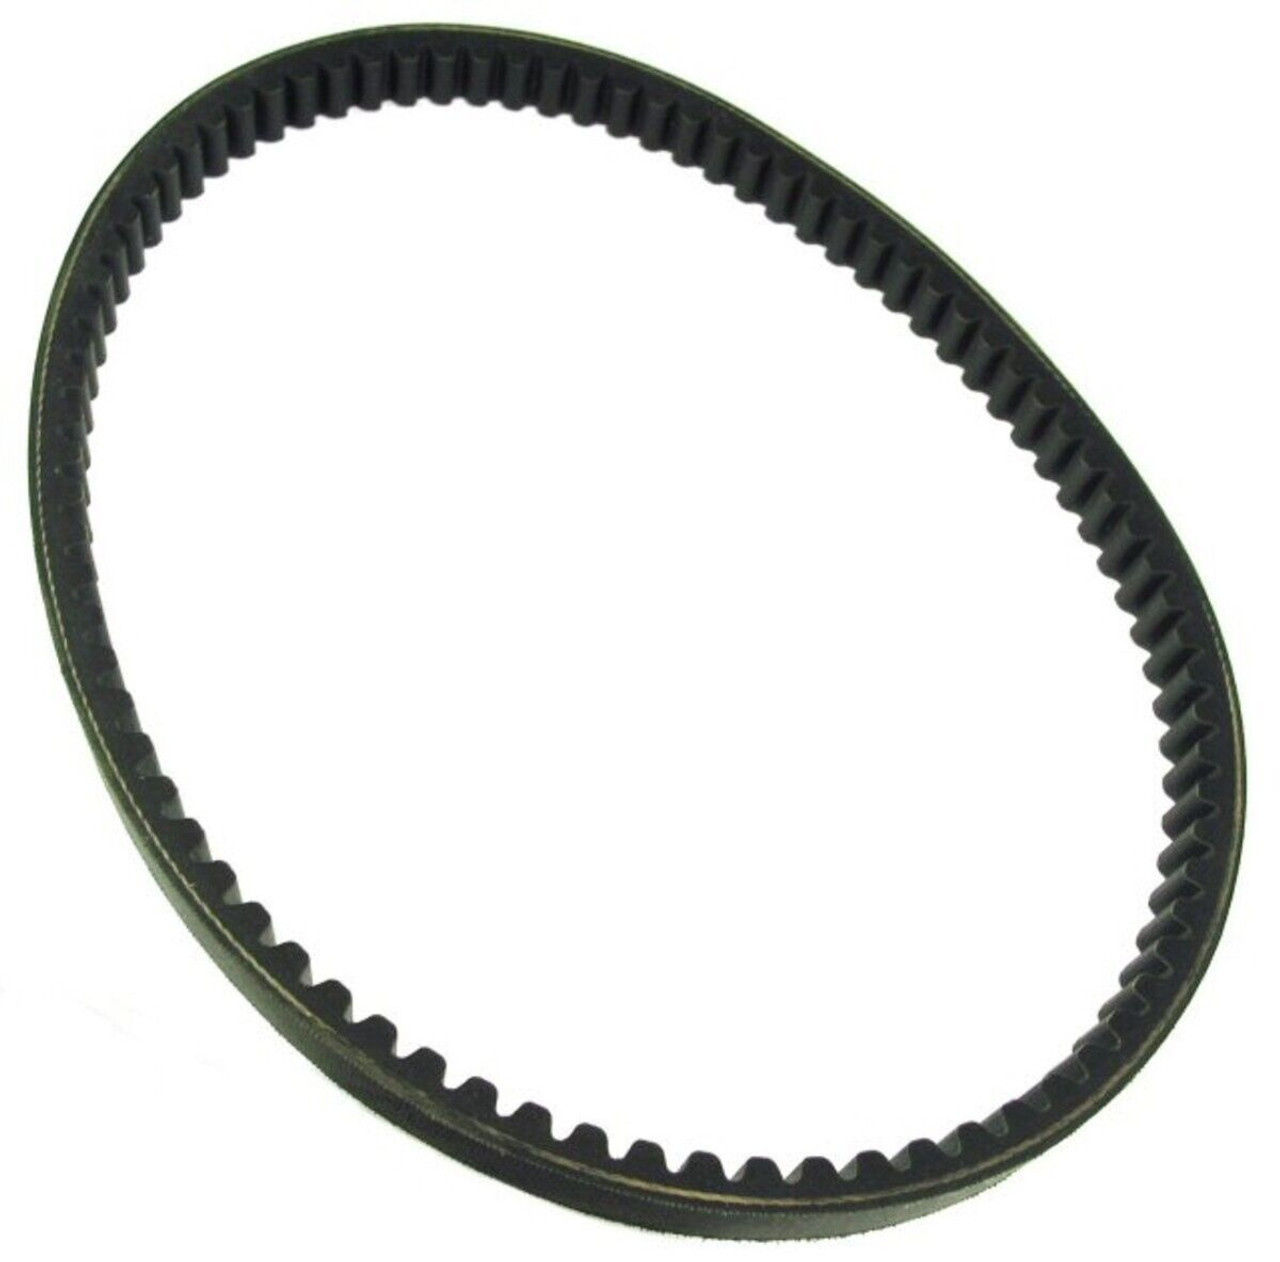 GATES 835 X 20 X 30 DRIVE BELT MADE WITH KEVLAR FOR VENTO SCOOTERS